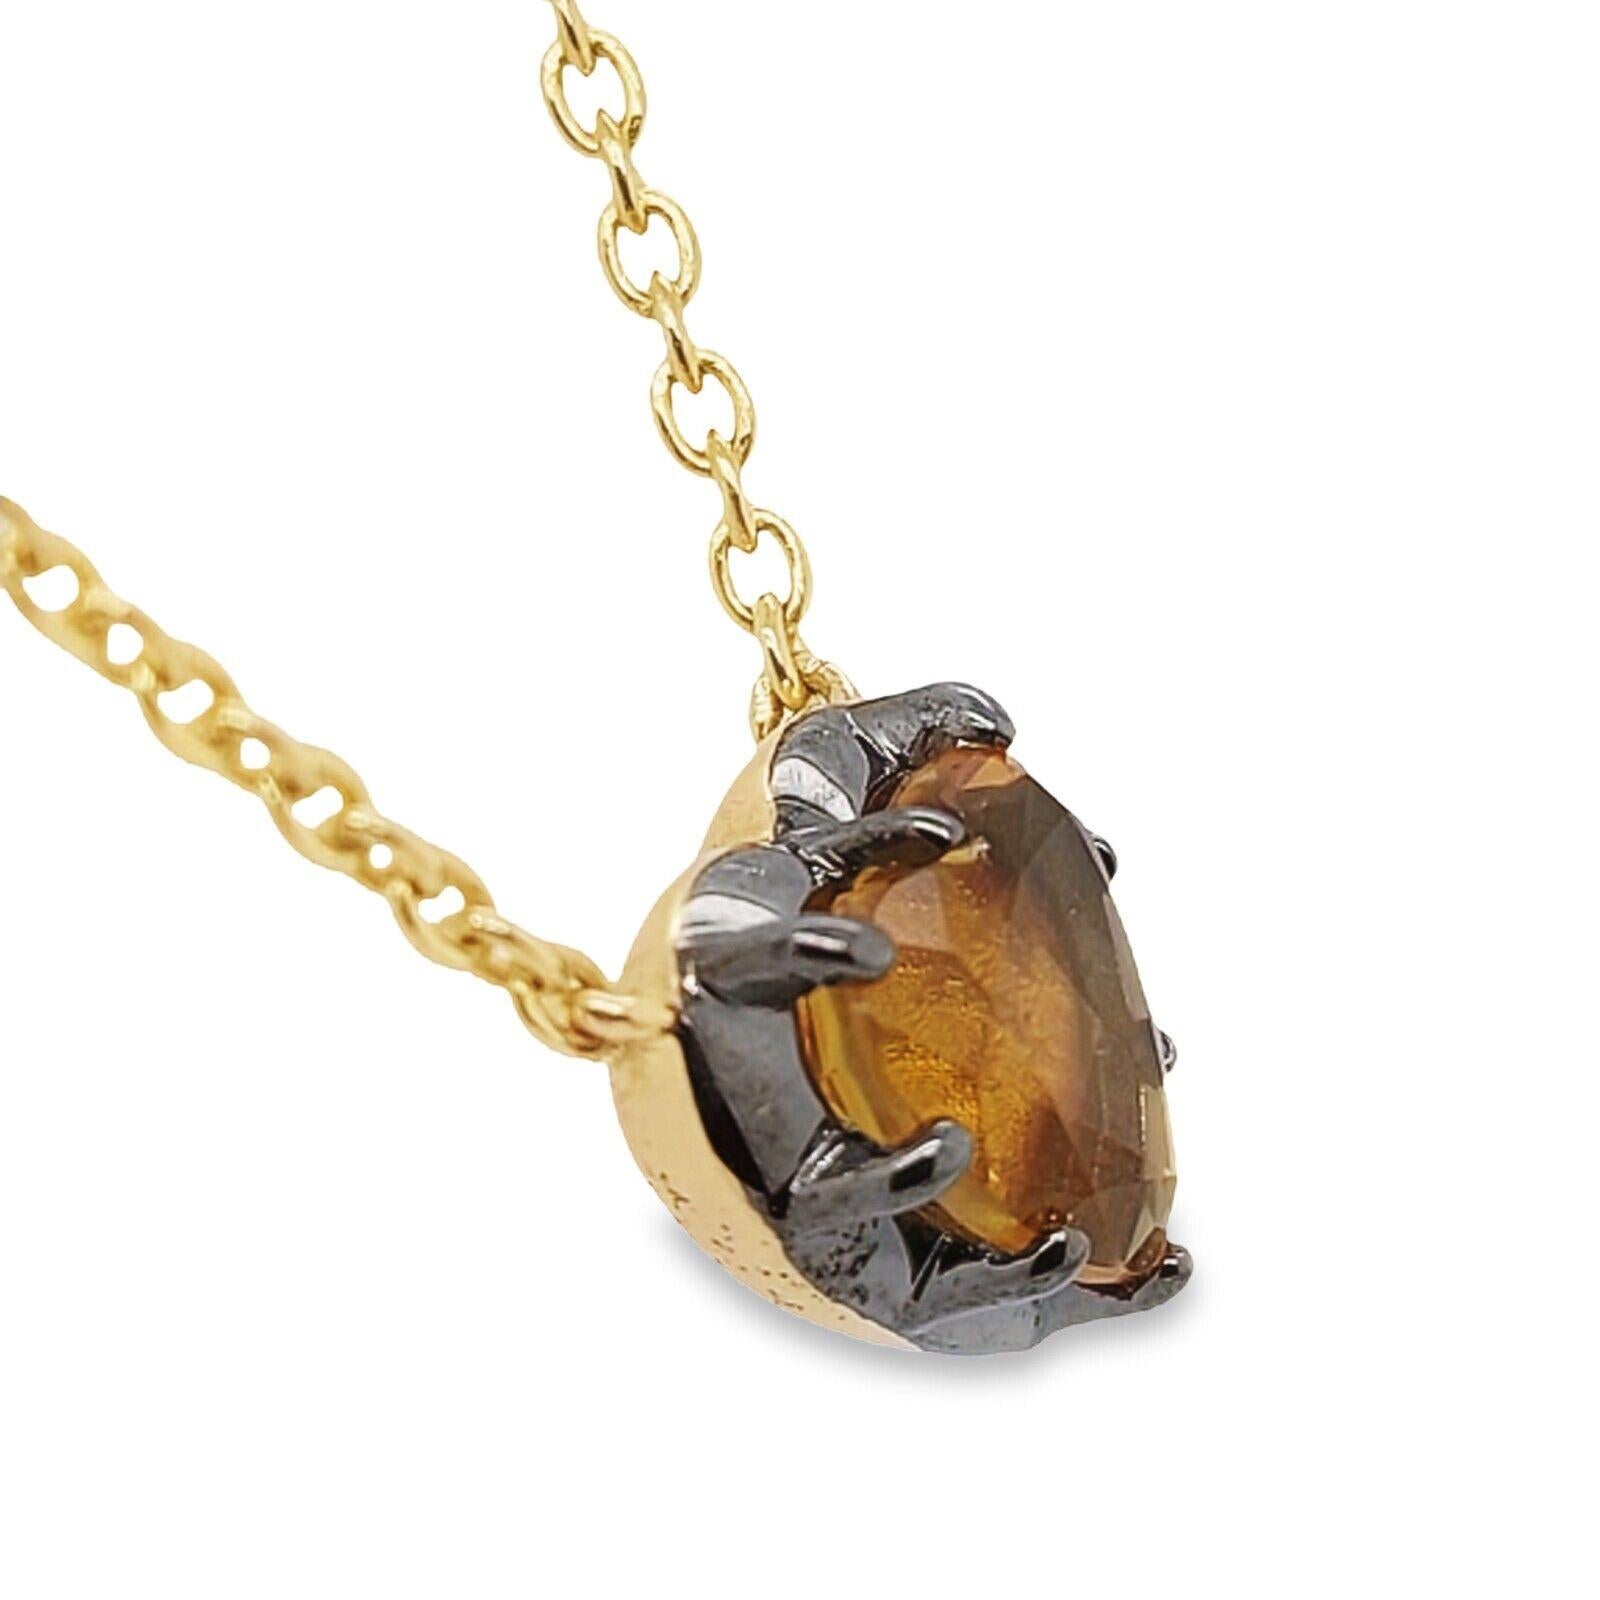 Made by Jewellery Cave- introducing the epitome of elegance and luxury gifting - our stunning 2.5ct Golden Citrine heart necklace set in 14ct Yellow Gold on a 16/18